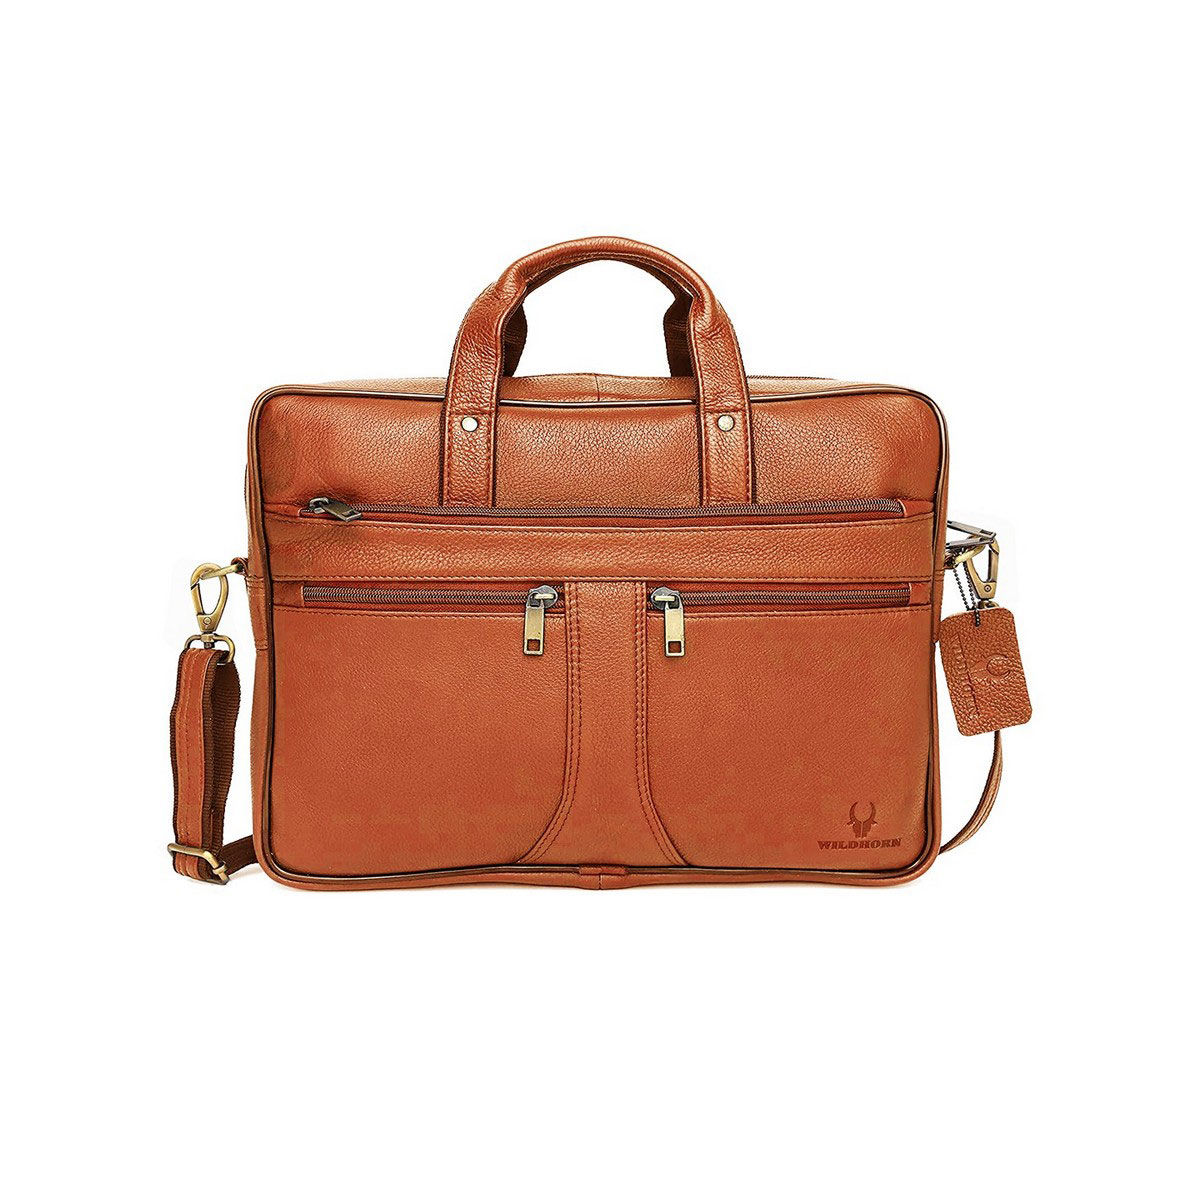 Genuine Leather Tan Leather Briefcase for Men Office 17 Inch  Tan    Ambur Online Leathers